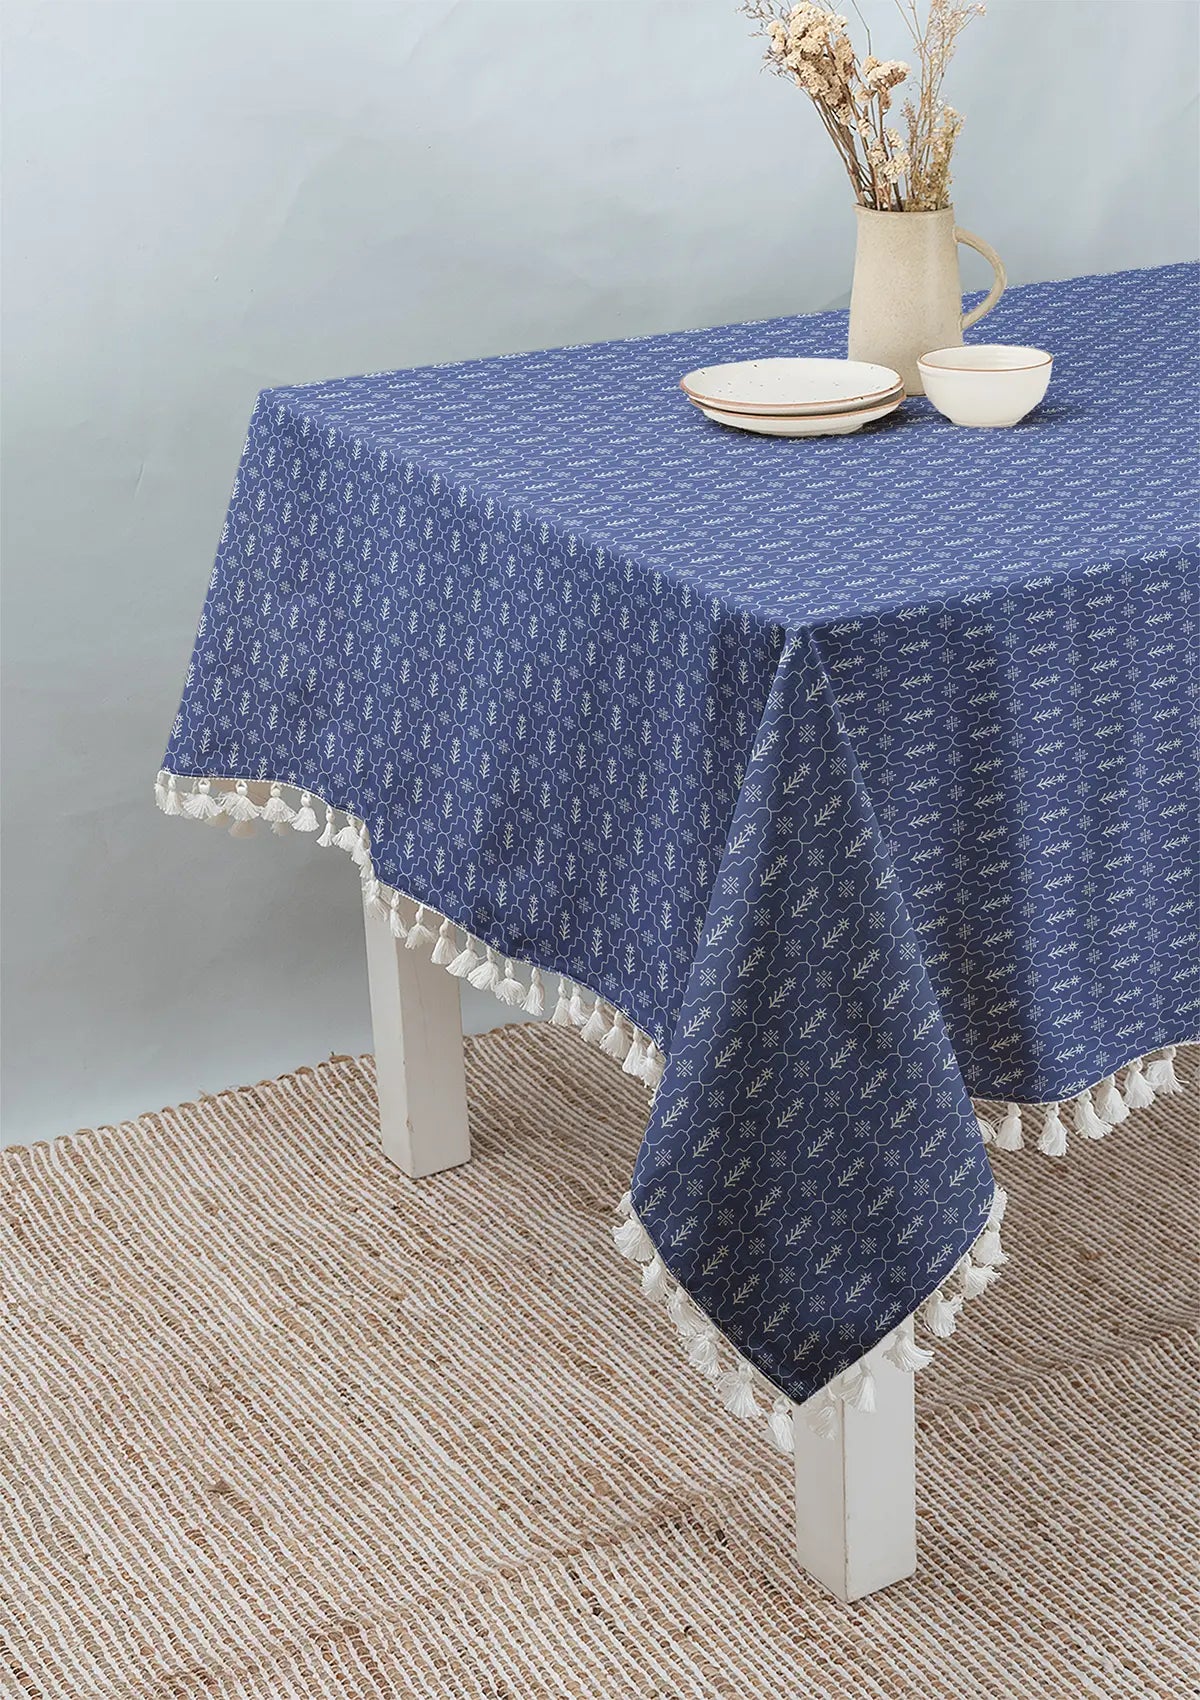 Meadows 100% cotton geomtric table cloth for 4 seater or 6 seater dining - Indigo - With tassel